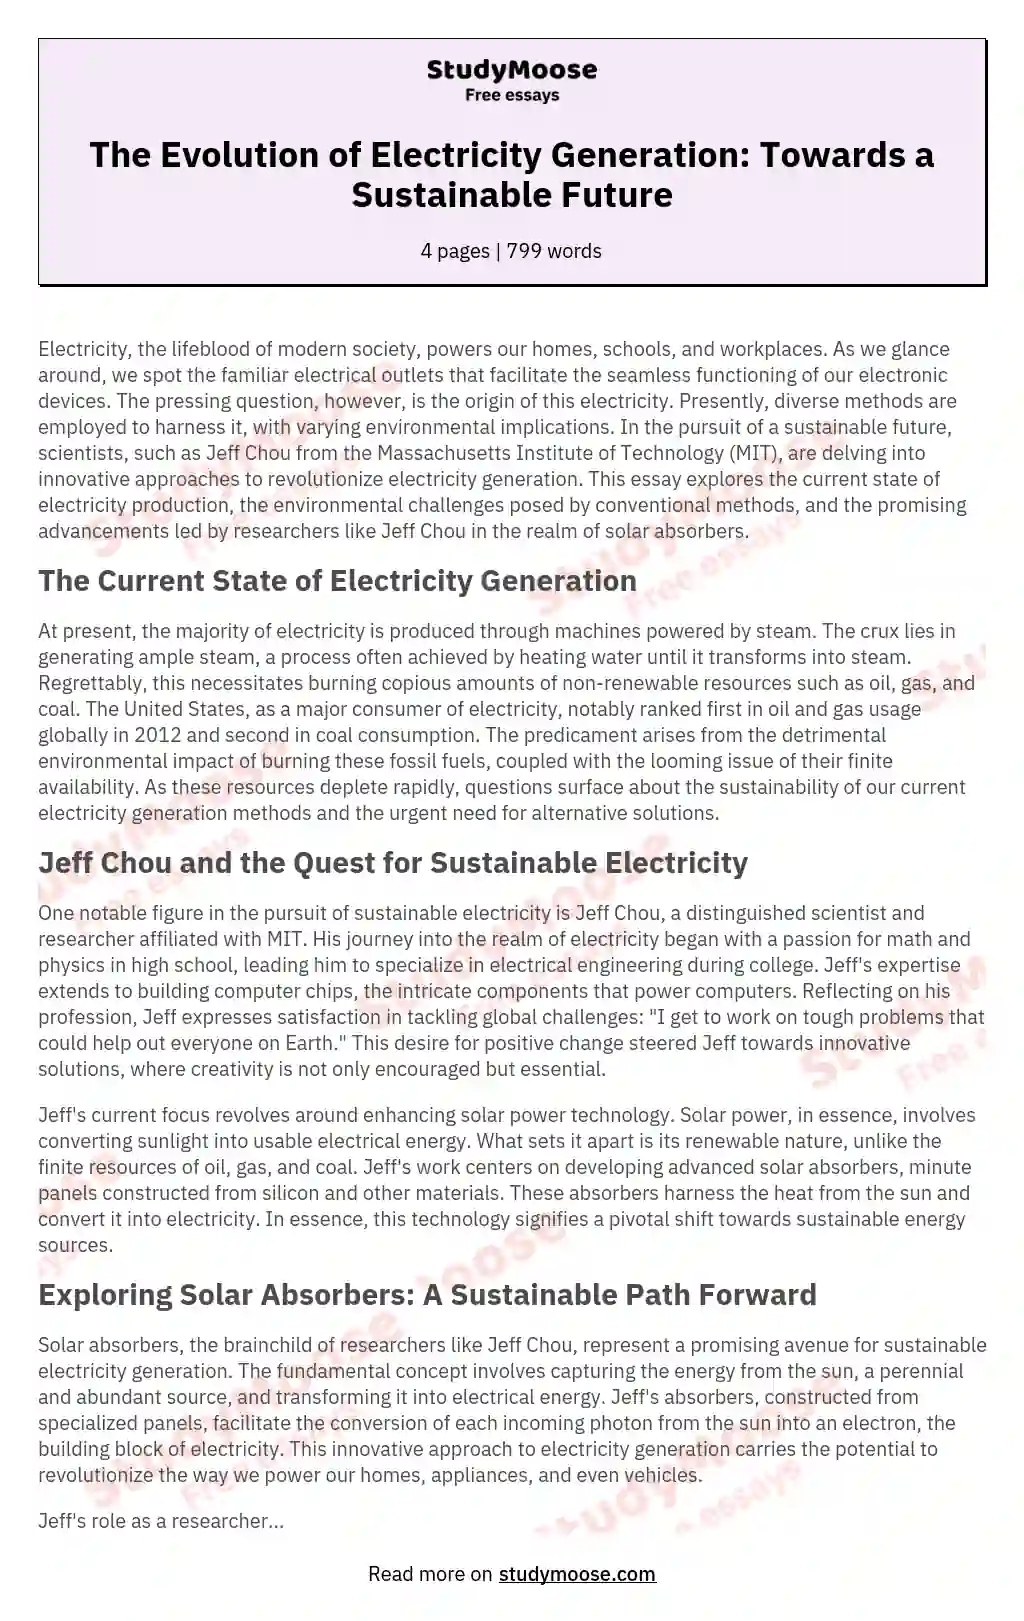 The Evolution of Electricity Generation: Towards a Sustainable Future essay